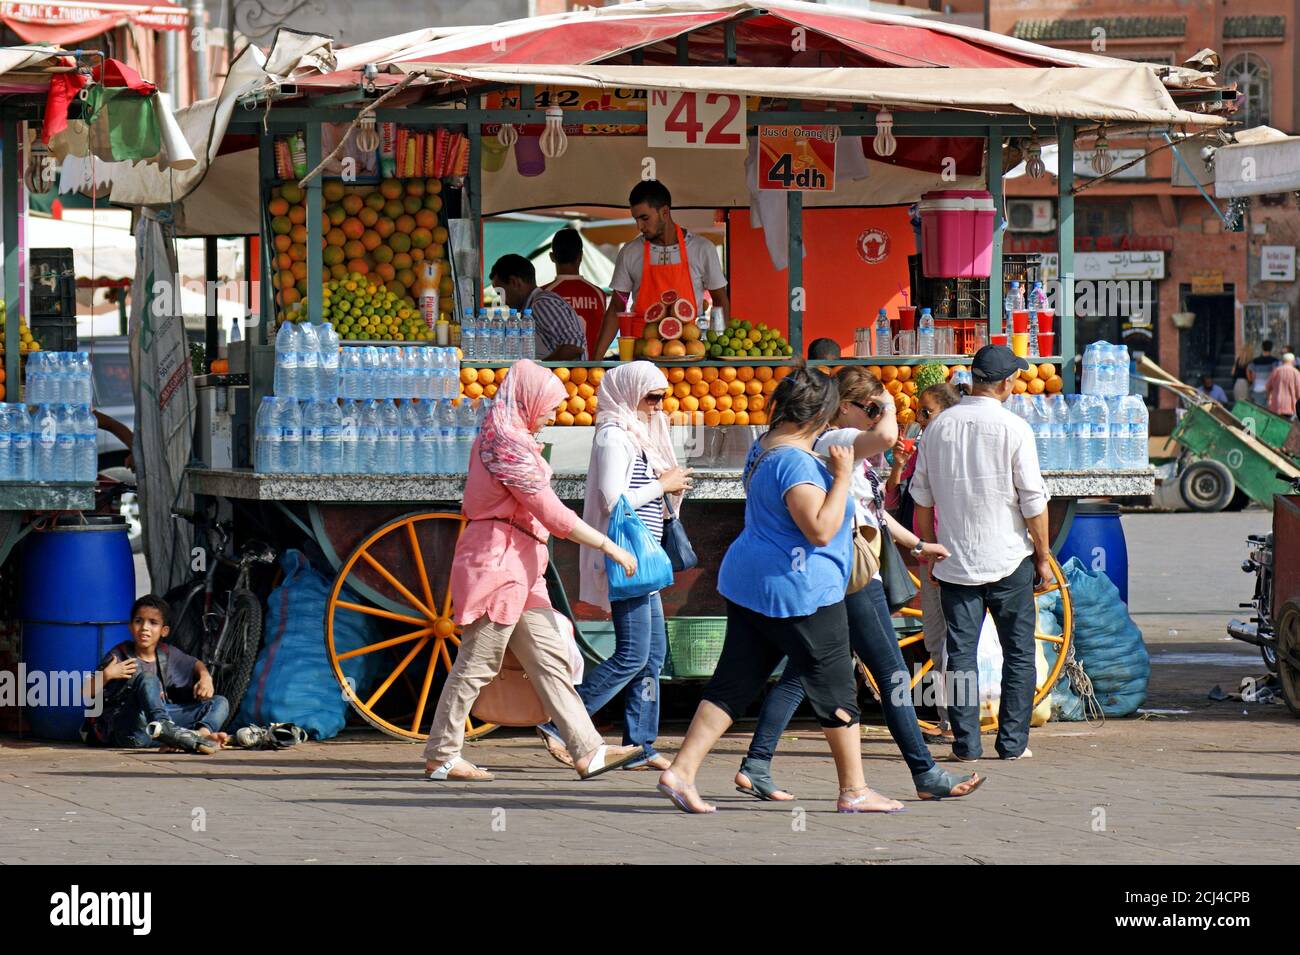 A fruit and juice stand is passed by people during the day in the Marrakech old medina market in Marrakech, Morocco. Stock Photo